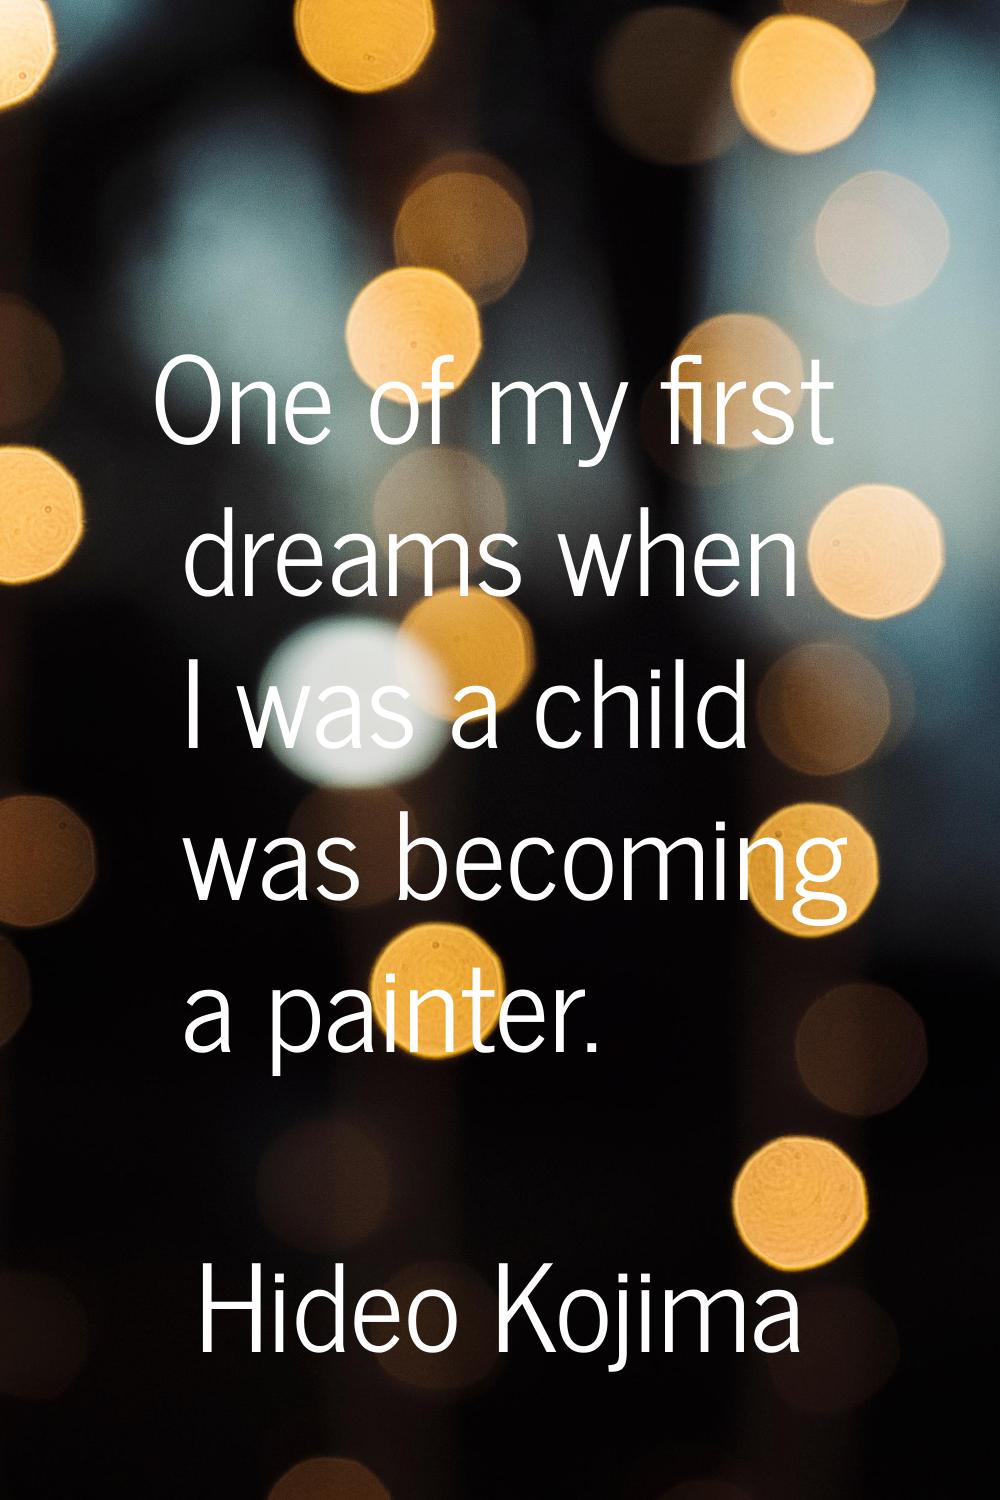 One of my first dreams when I was a child was becoming a painter.